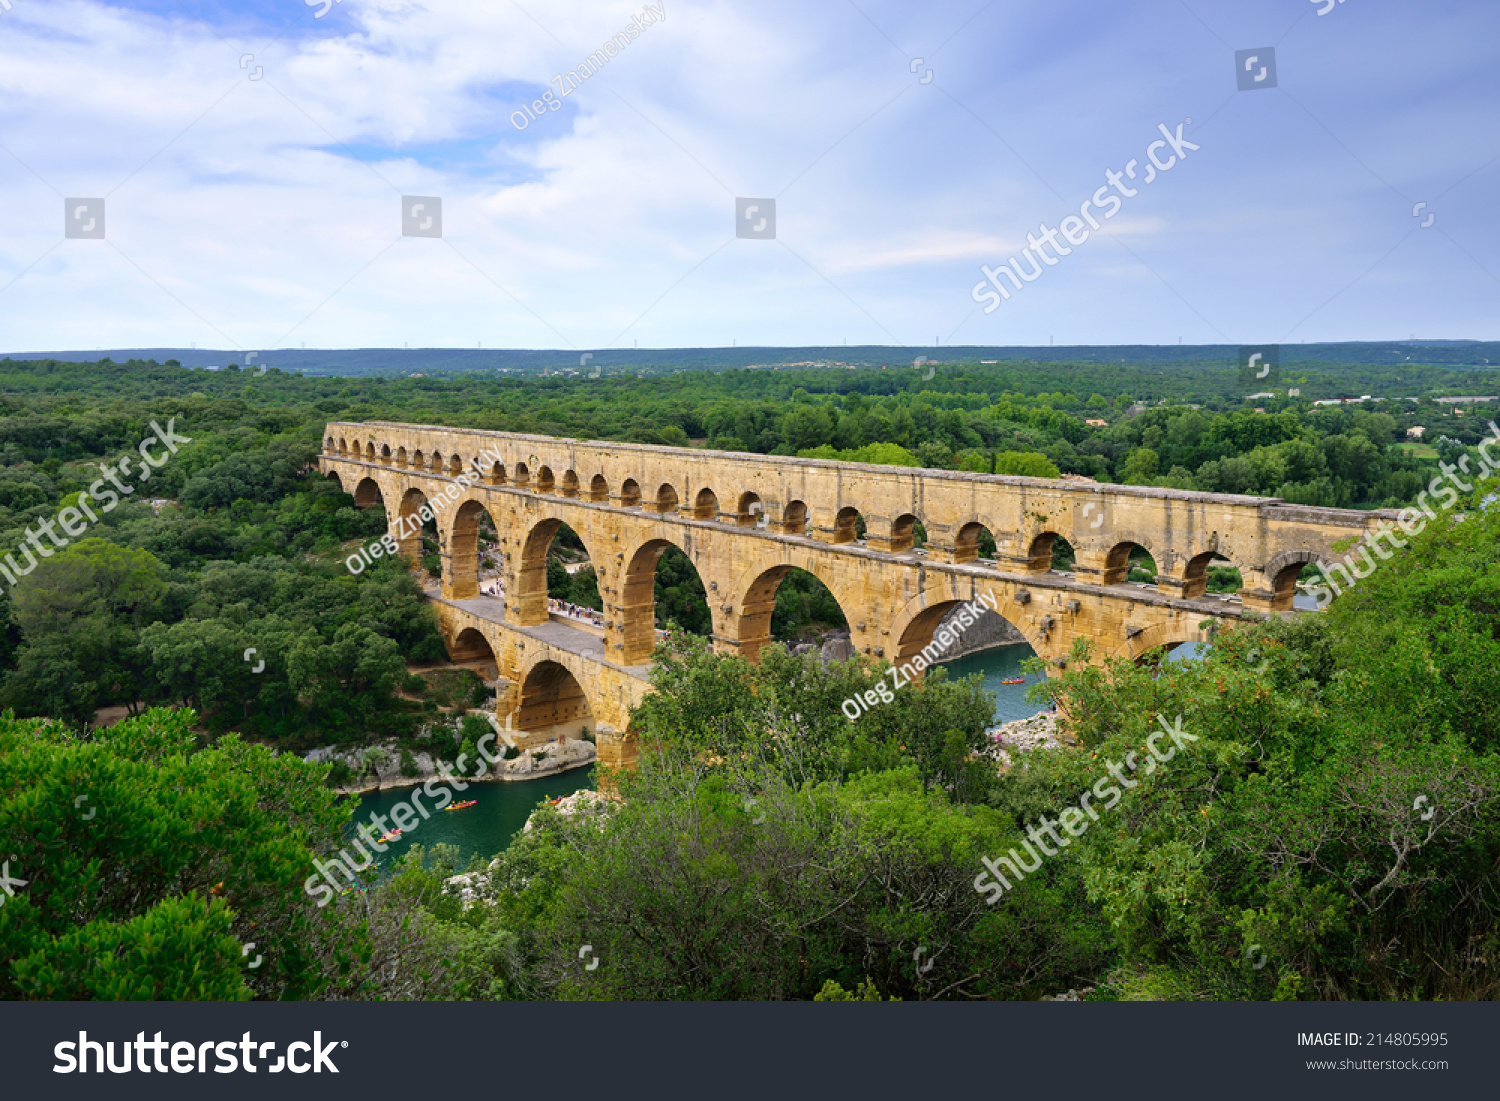 How Old Is The Aqueduct At Nimes 48